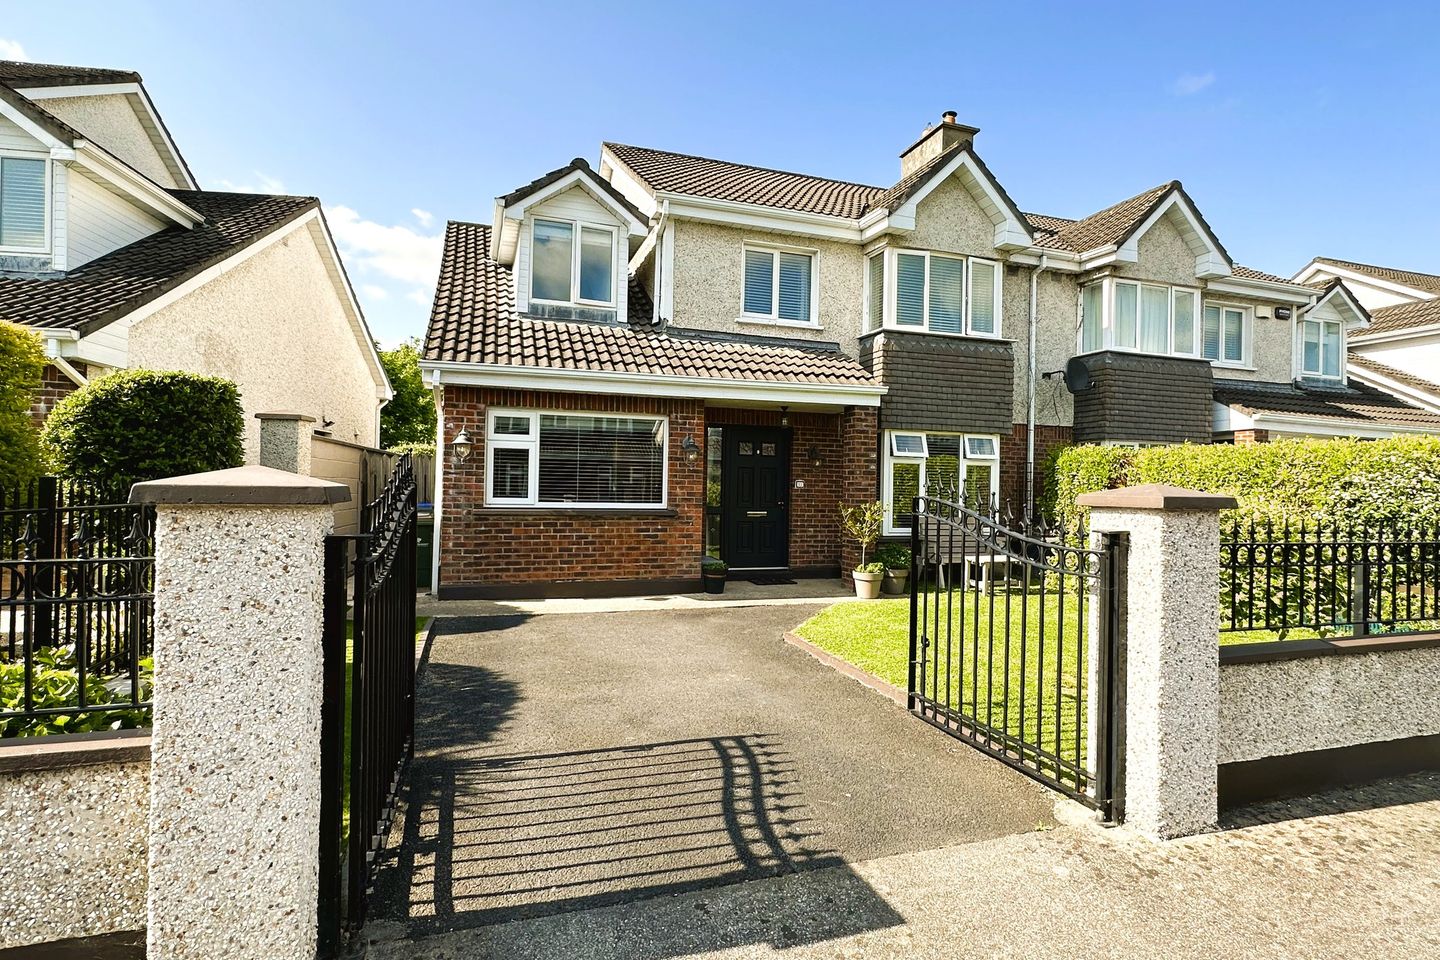 53 Cragaun, Father Russell Road, Raheen, Co. Limerick